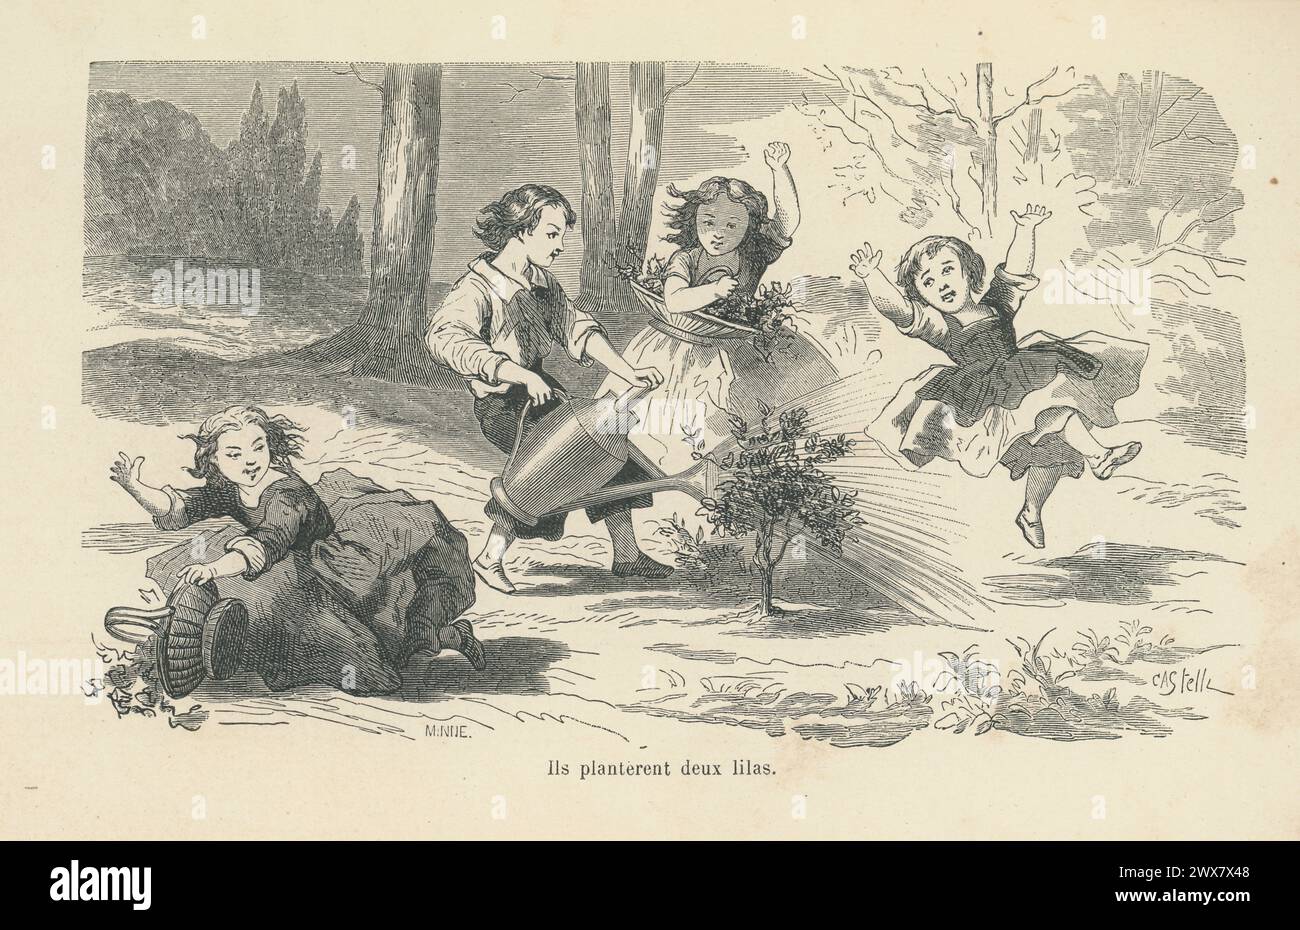 'They raked the area and planted two lilacs there.'  Illustration from 'Les malheurs de Sophie', written by the Countess of Ségur in 1858. 1880 edition illustrated by Horace Castelli and published by Hachette. Stock Photo